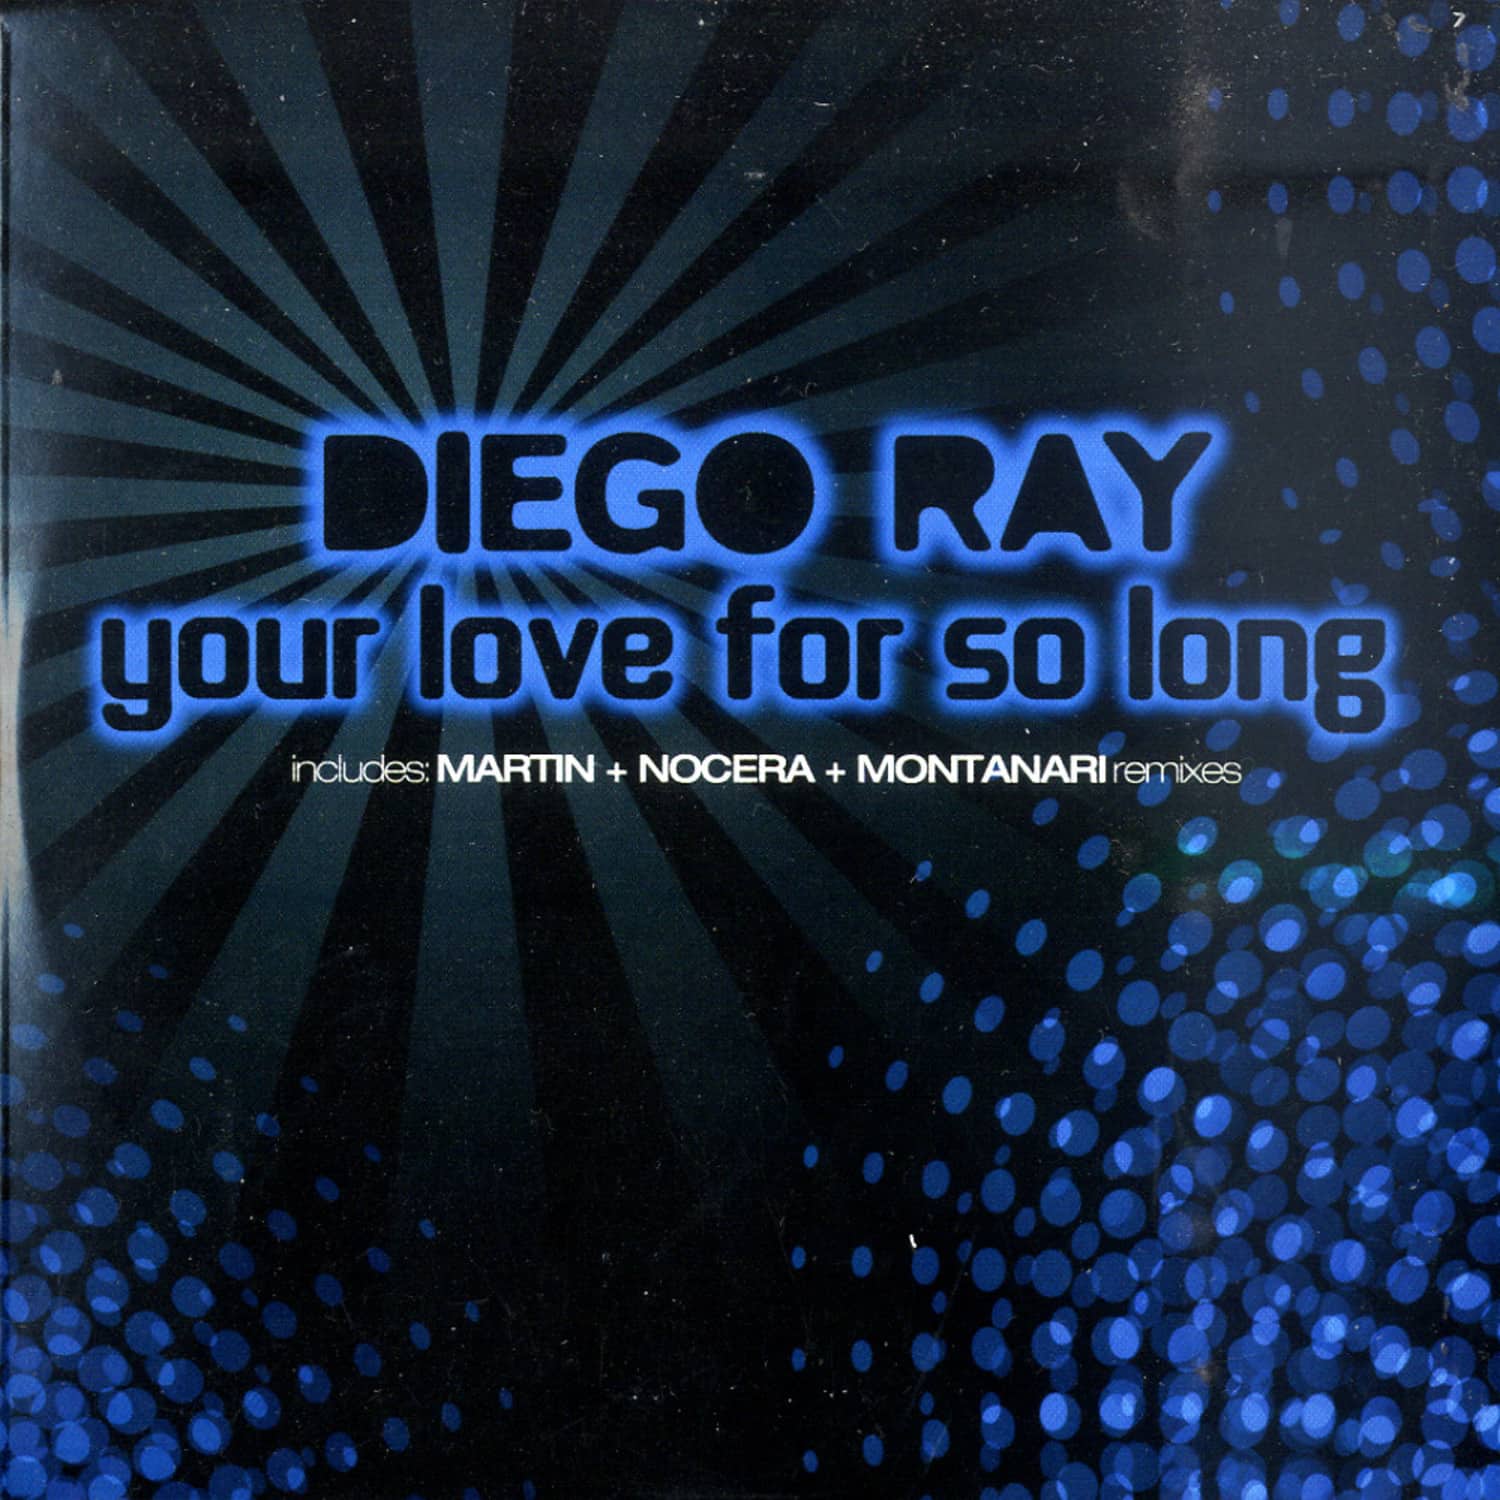 Diego Ray - YOUR LOVE FOR SO LONG 